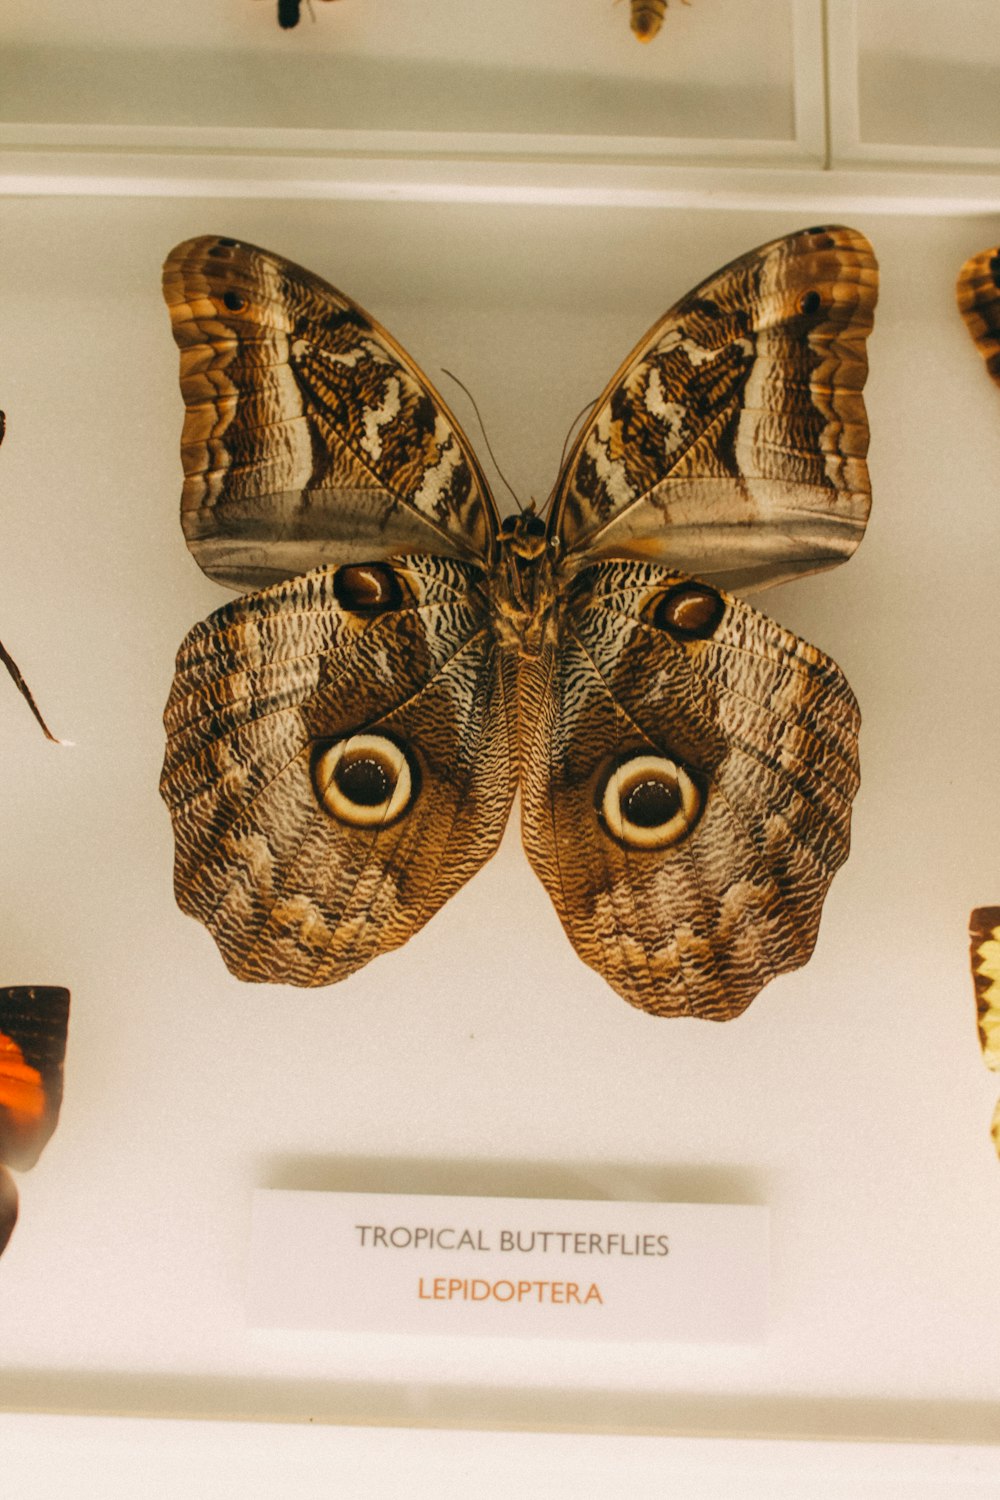 a display of butterflies and moths in a glass case